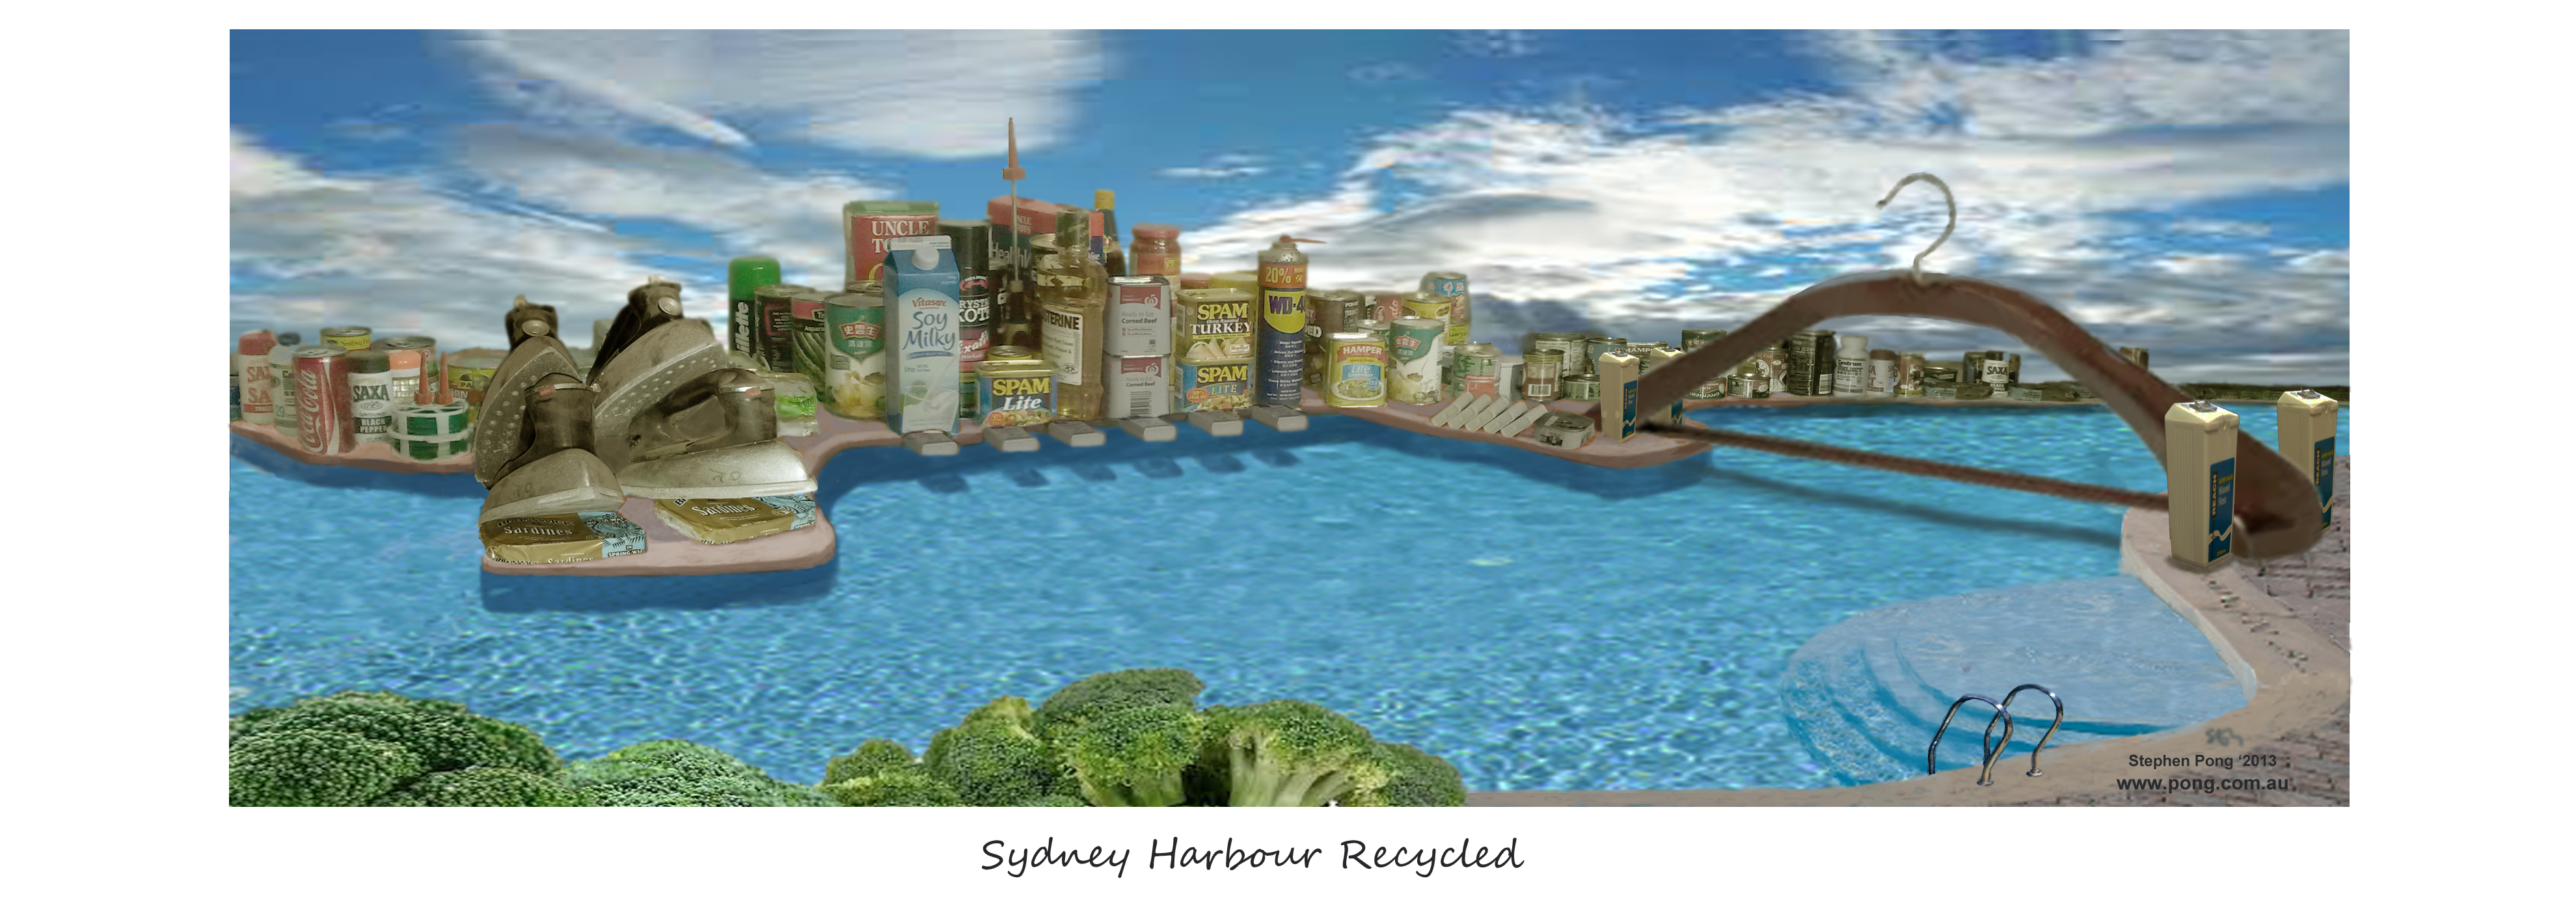 sydney harbour recycled